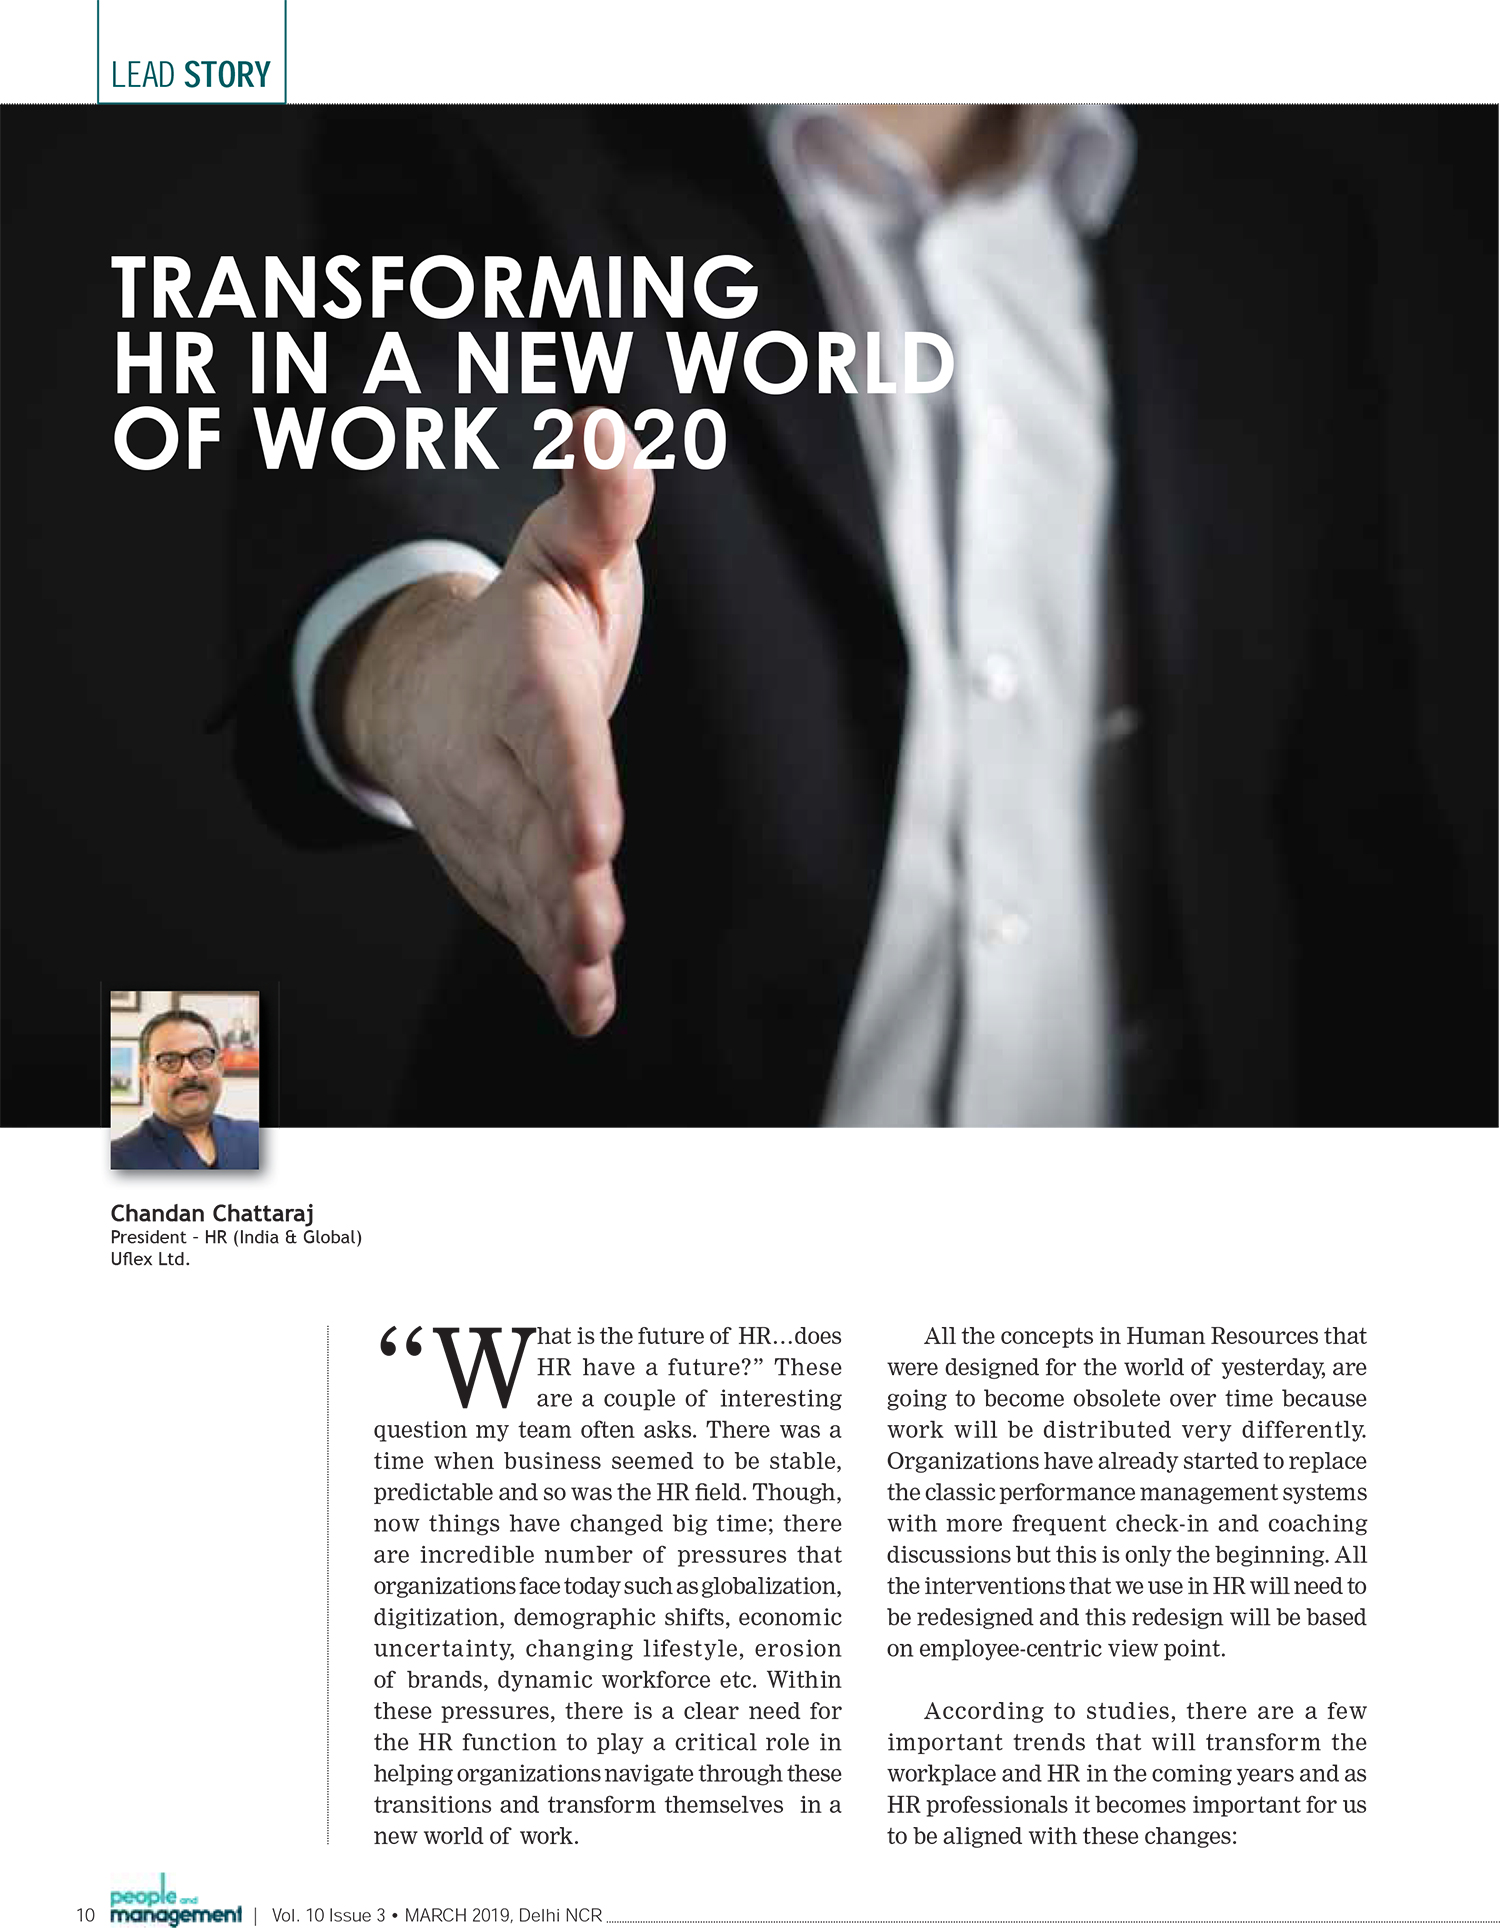 Chandan Chattaraj Writes An Exclusive OPED For People and Management About The Transforming HR in a New World of Work 2020!